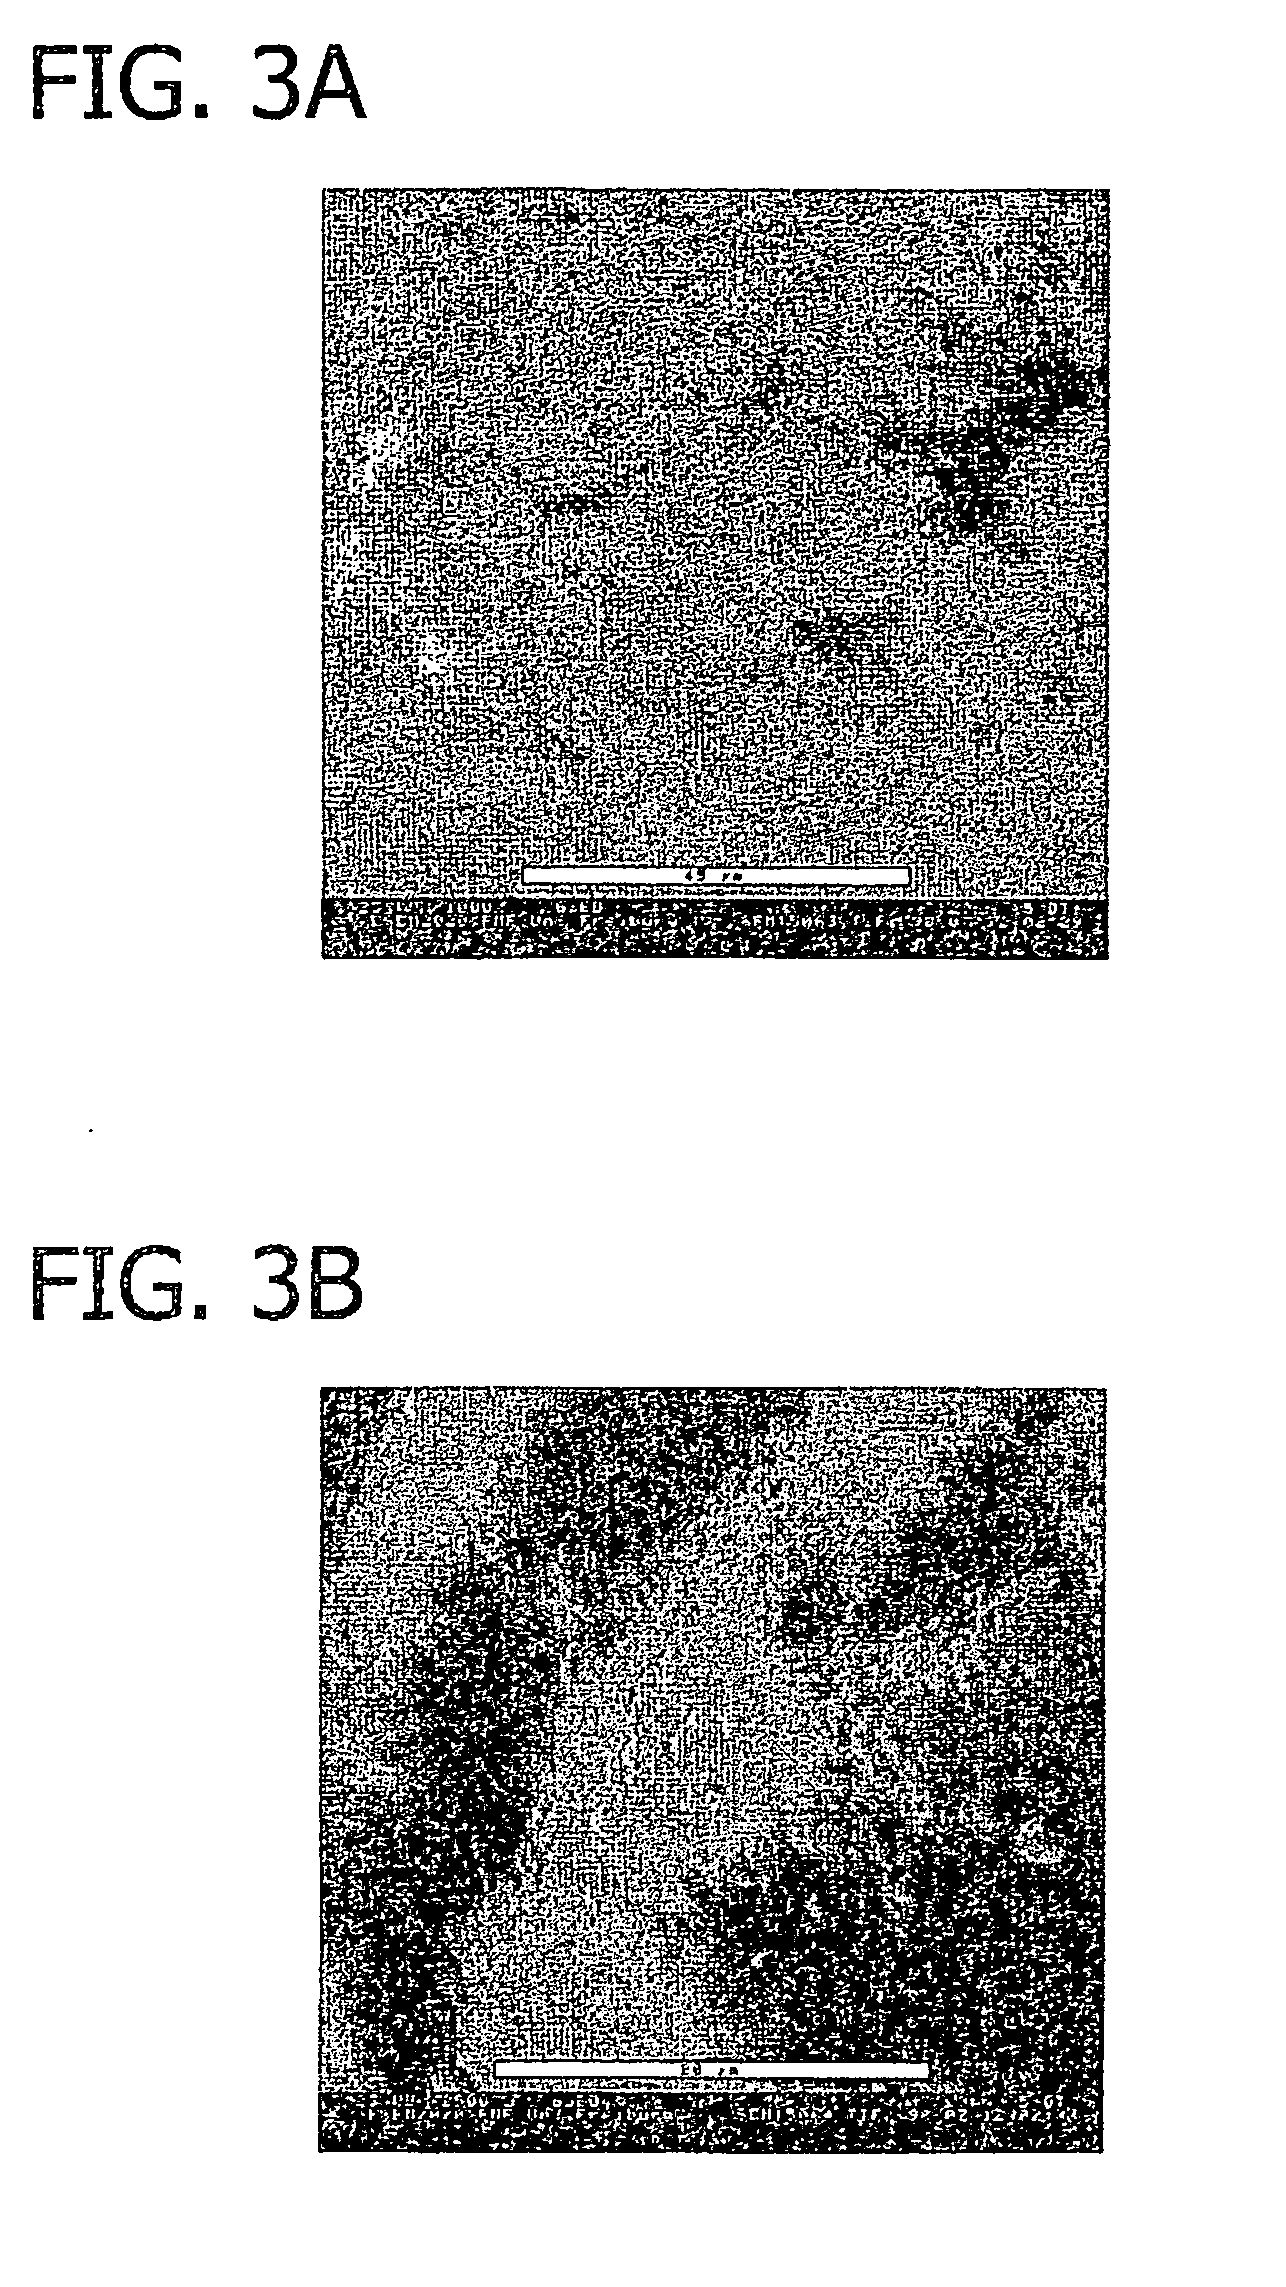 Method for directed cell in-growth and controlled tissue regeneration in spinal surgery